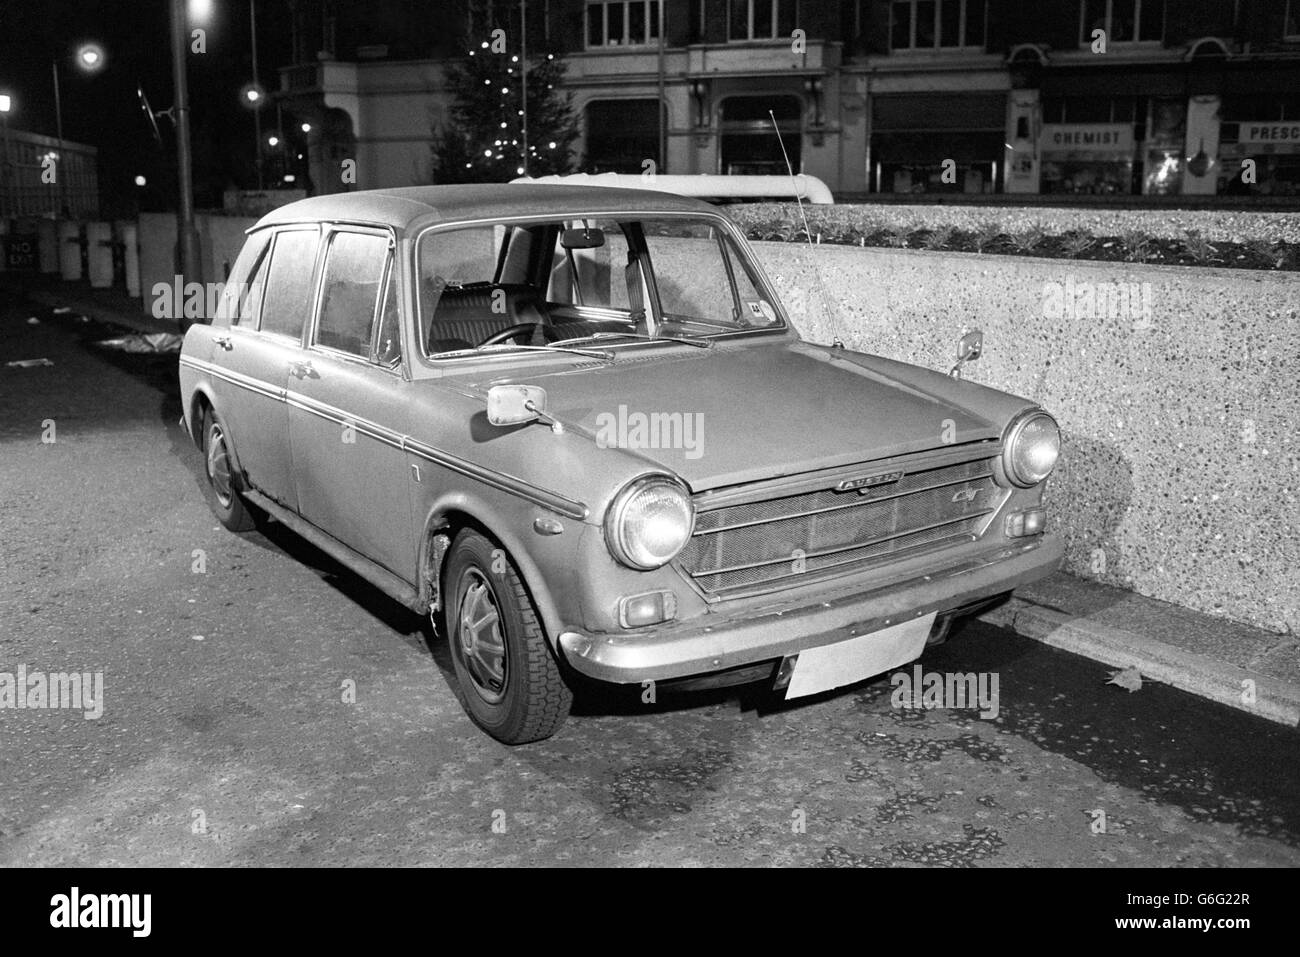 A 1972 blue Austin 1100 saloon with a black vinyl roof - similar to the one used in the Harrods car bomb attack. Detectives hope to trace the previous owner of the car. Stock Photo